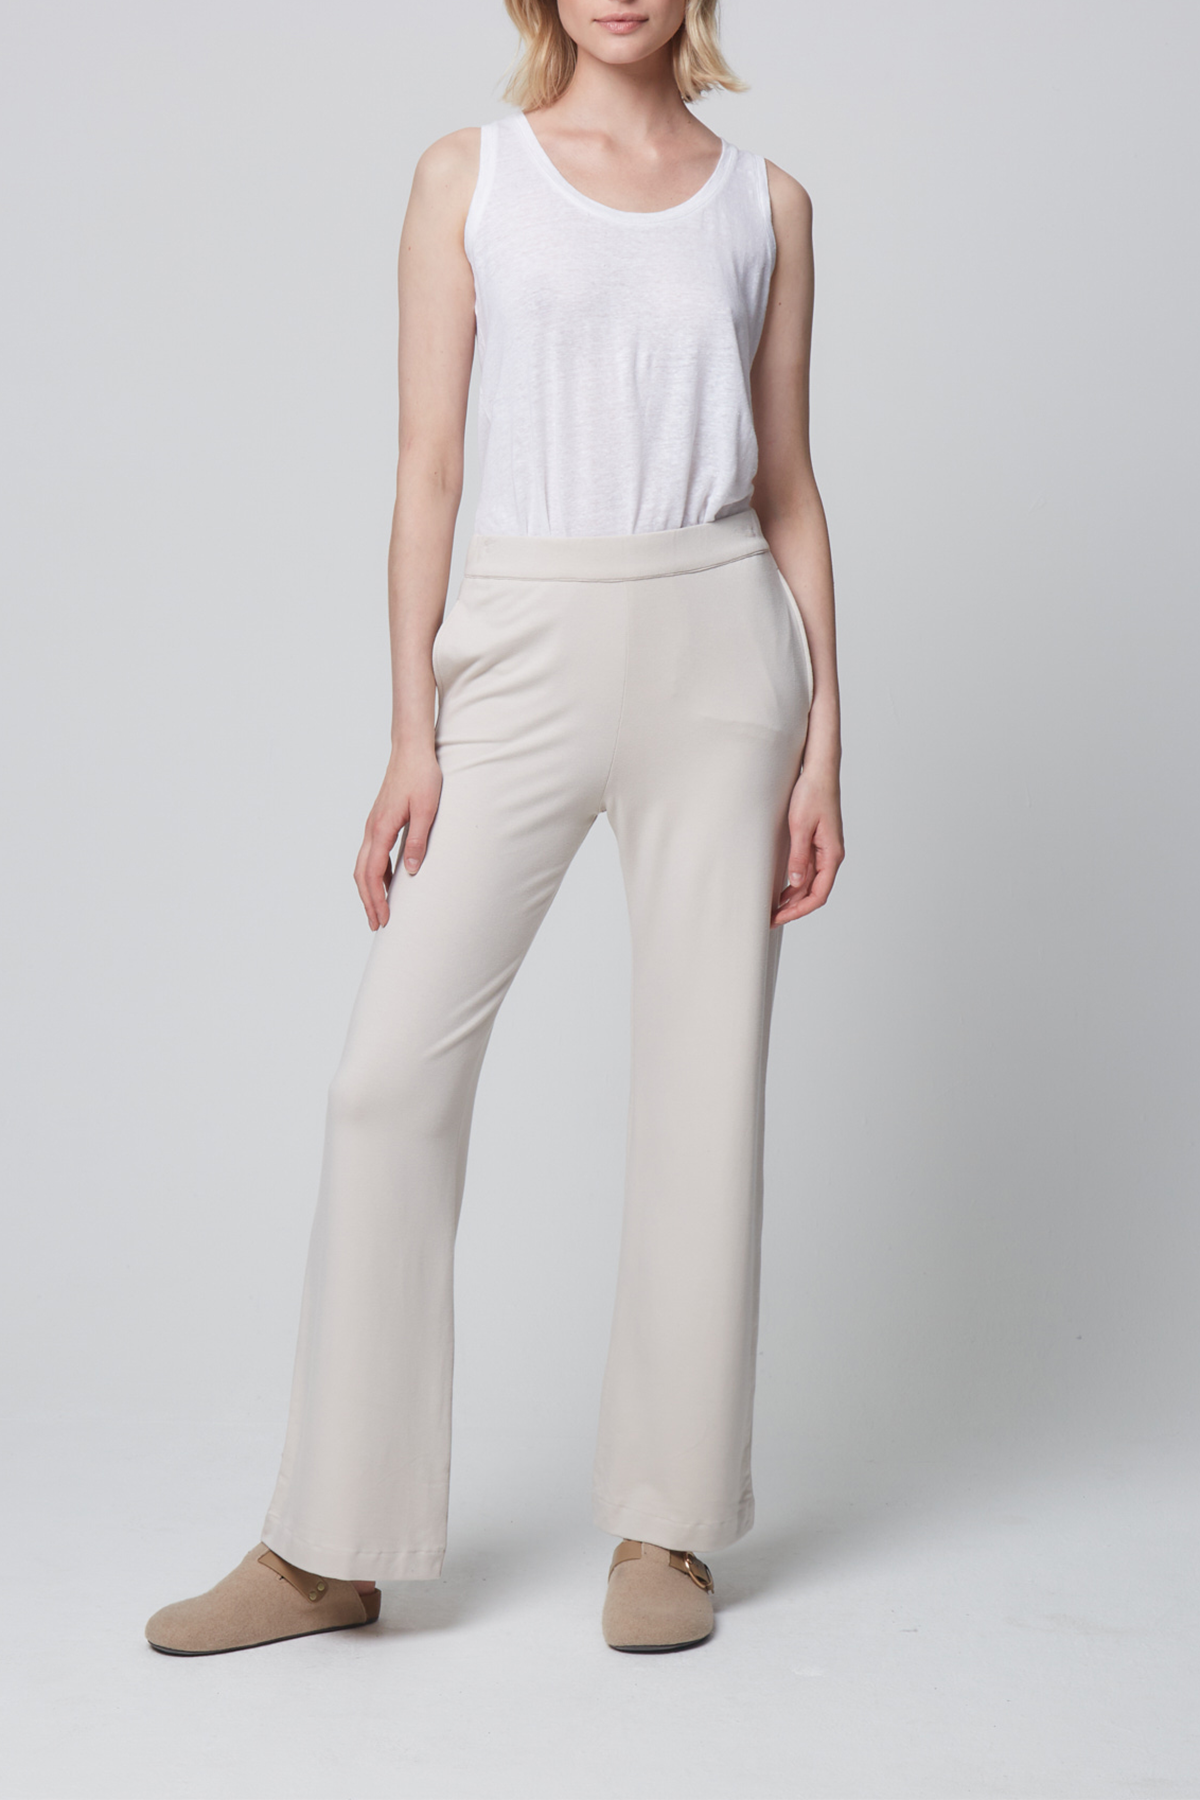 Majestic Filatures French Terry Soft Leg Pant